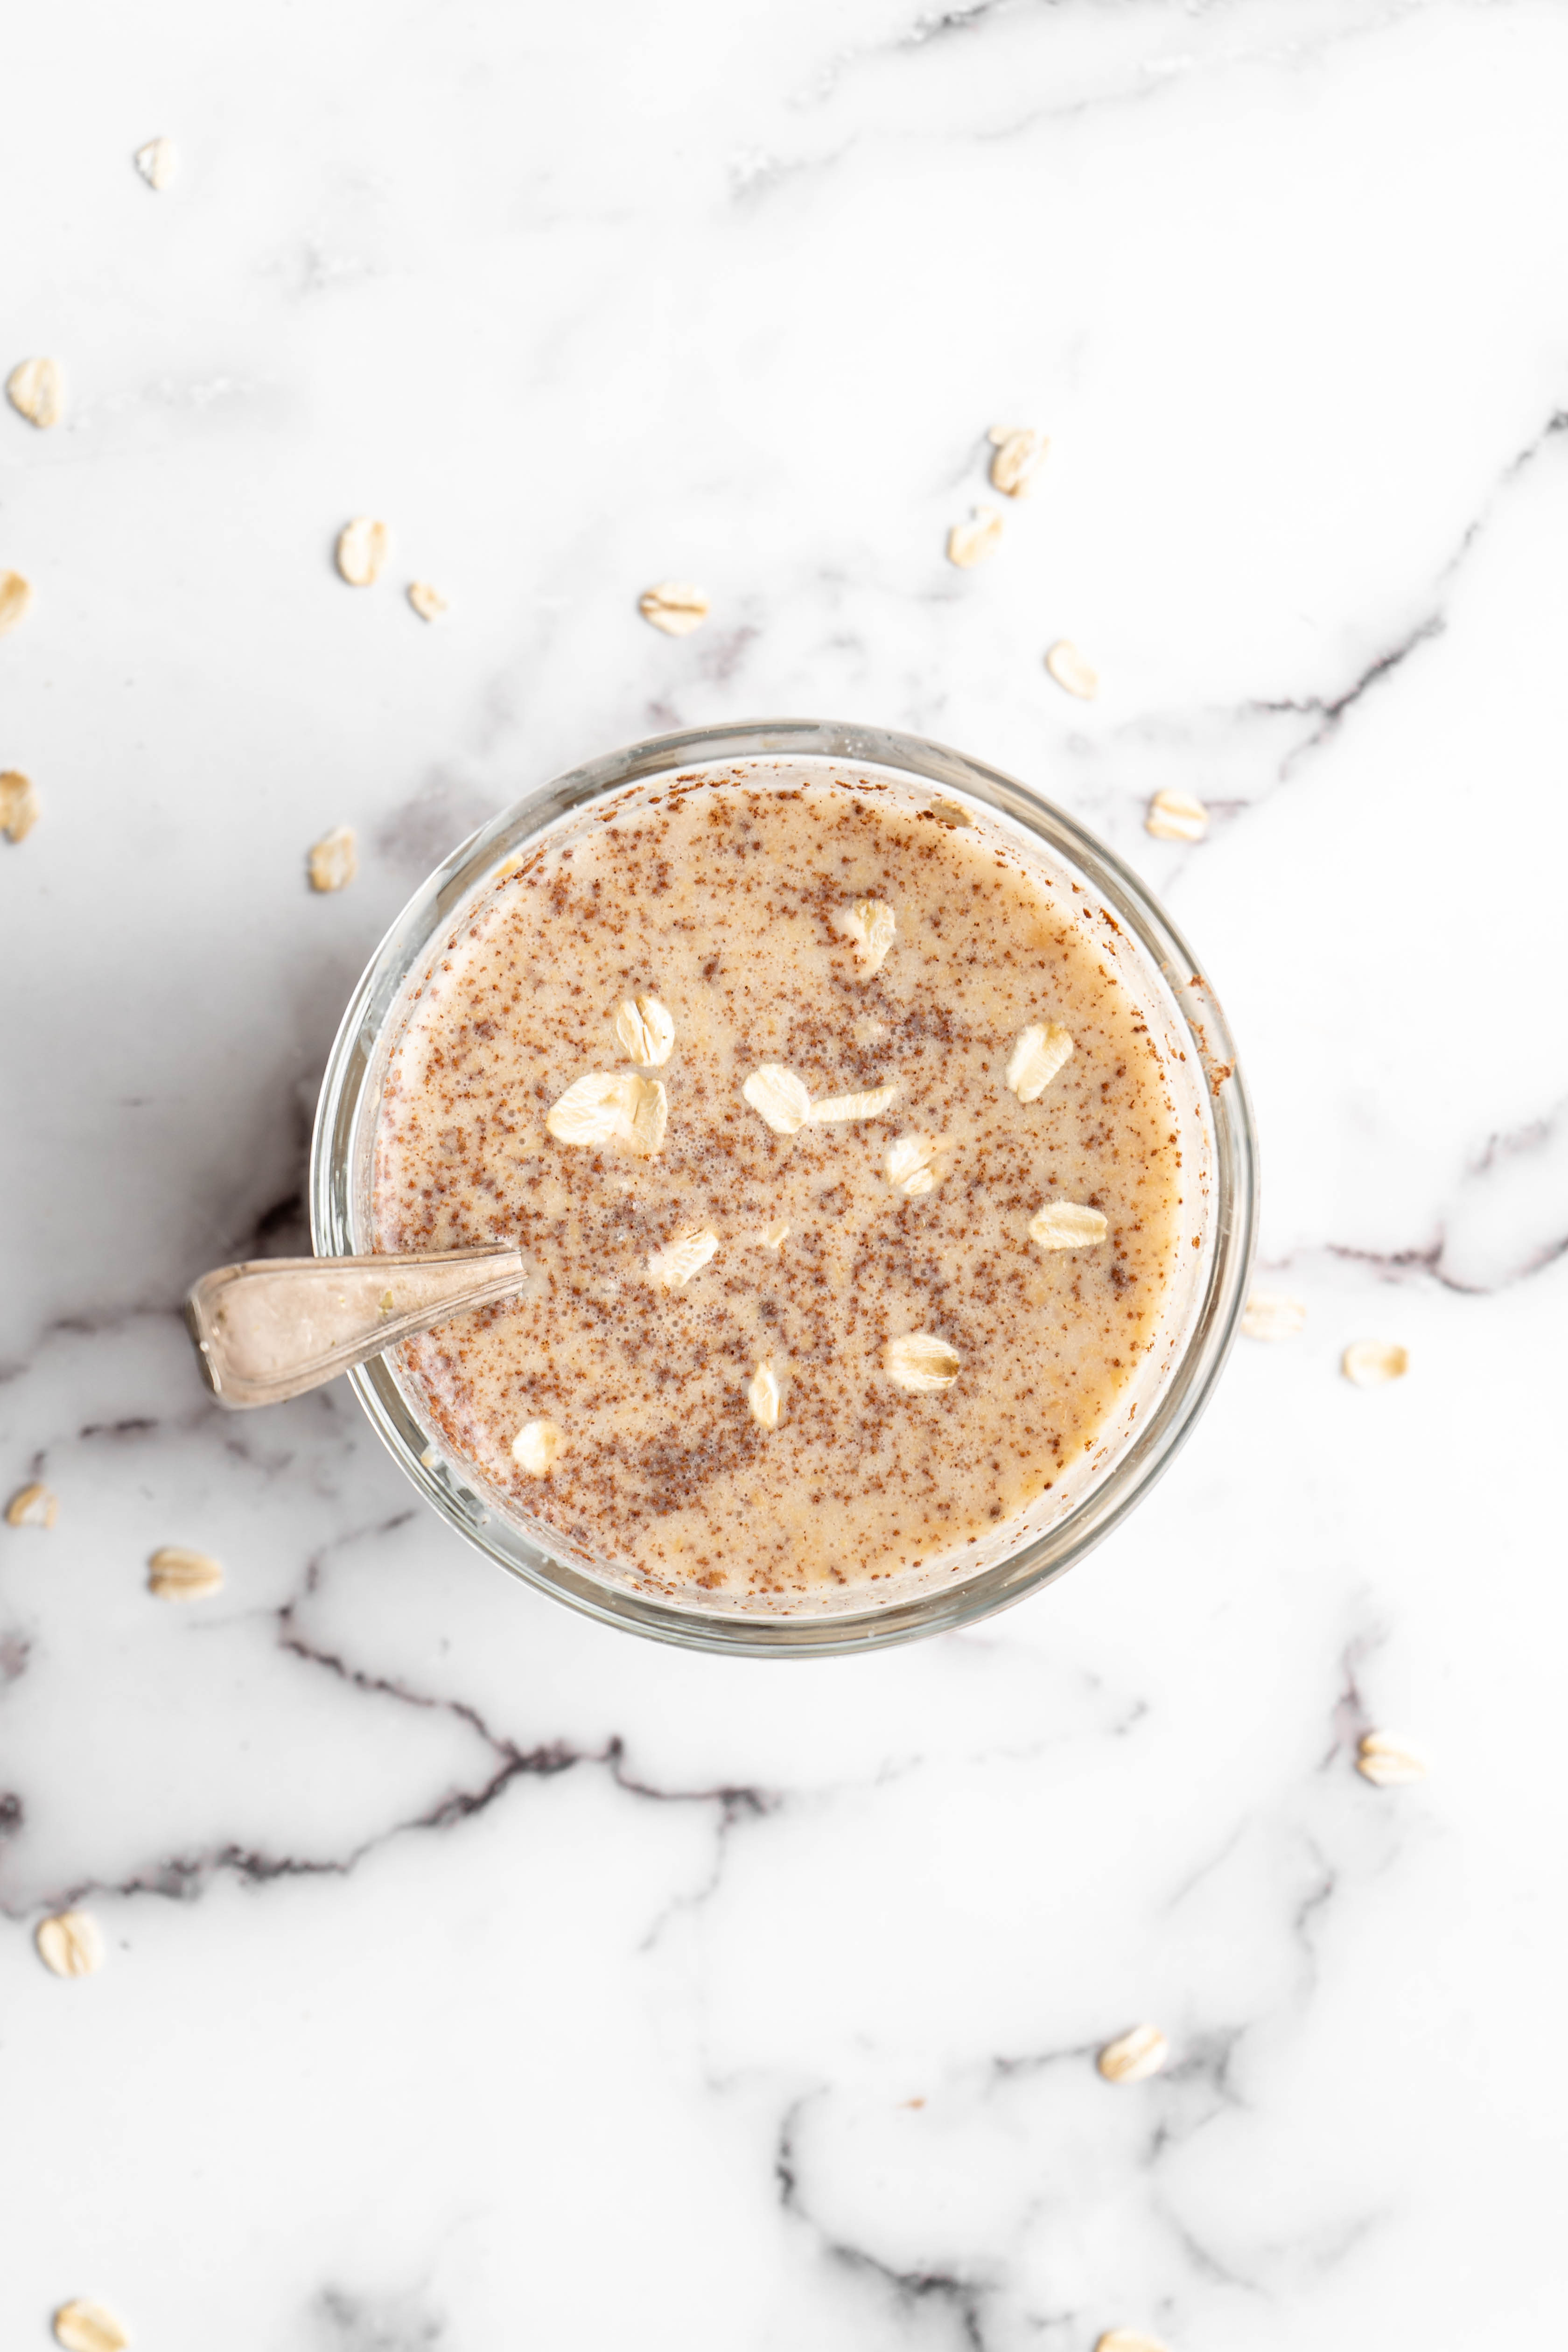 Overhead view of overnight oats in jar with spoon